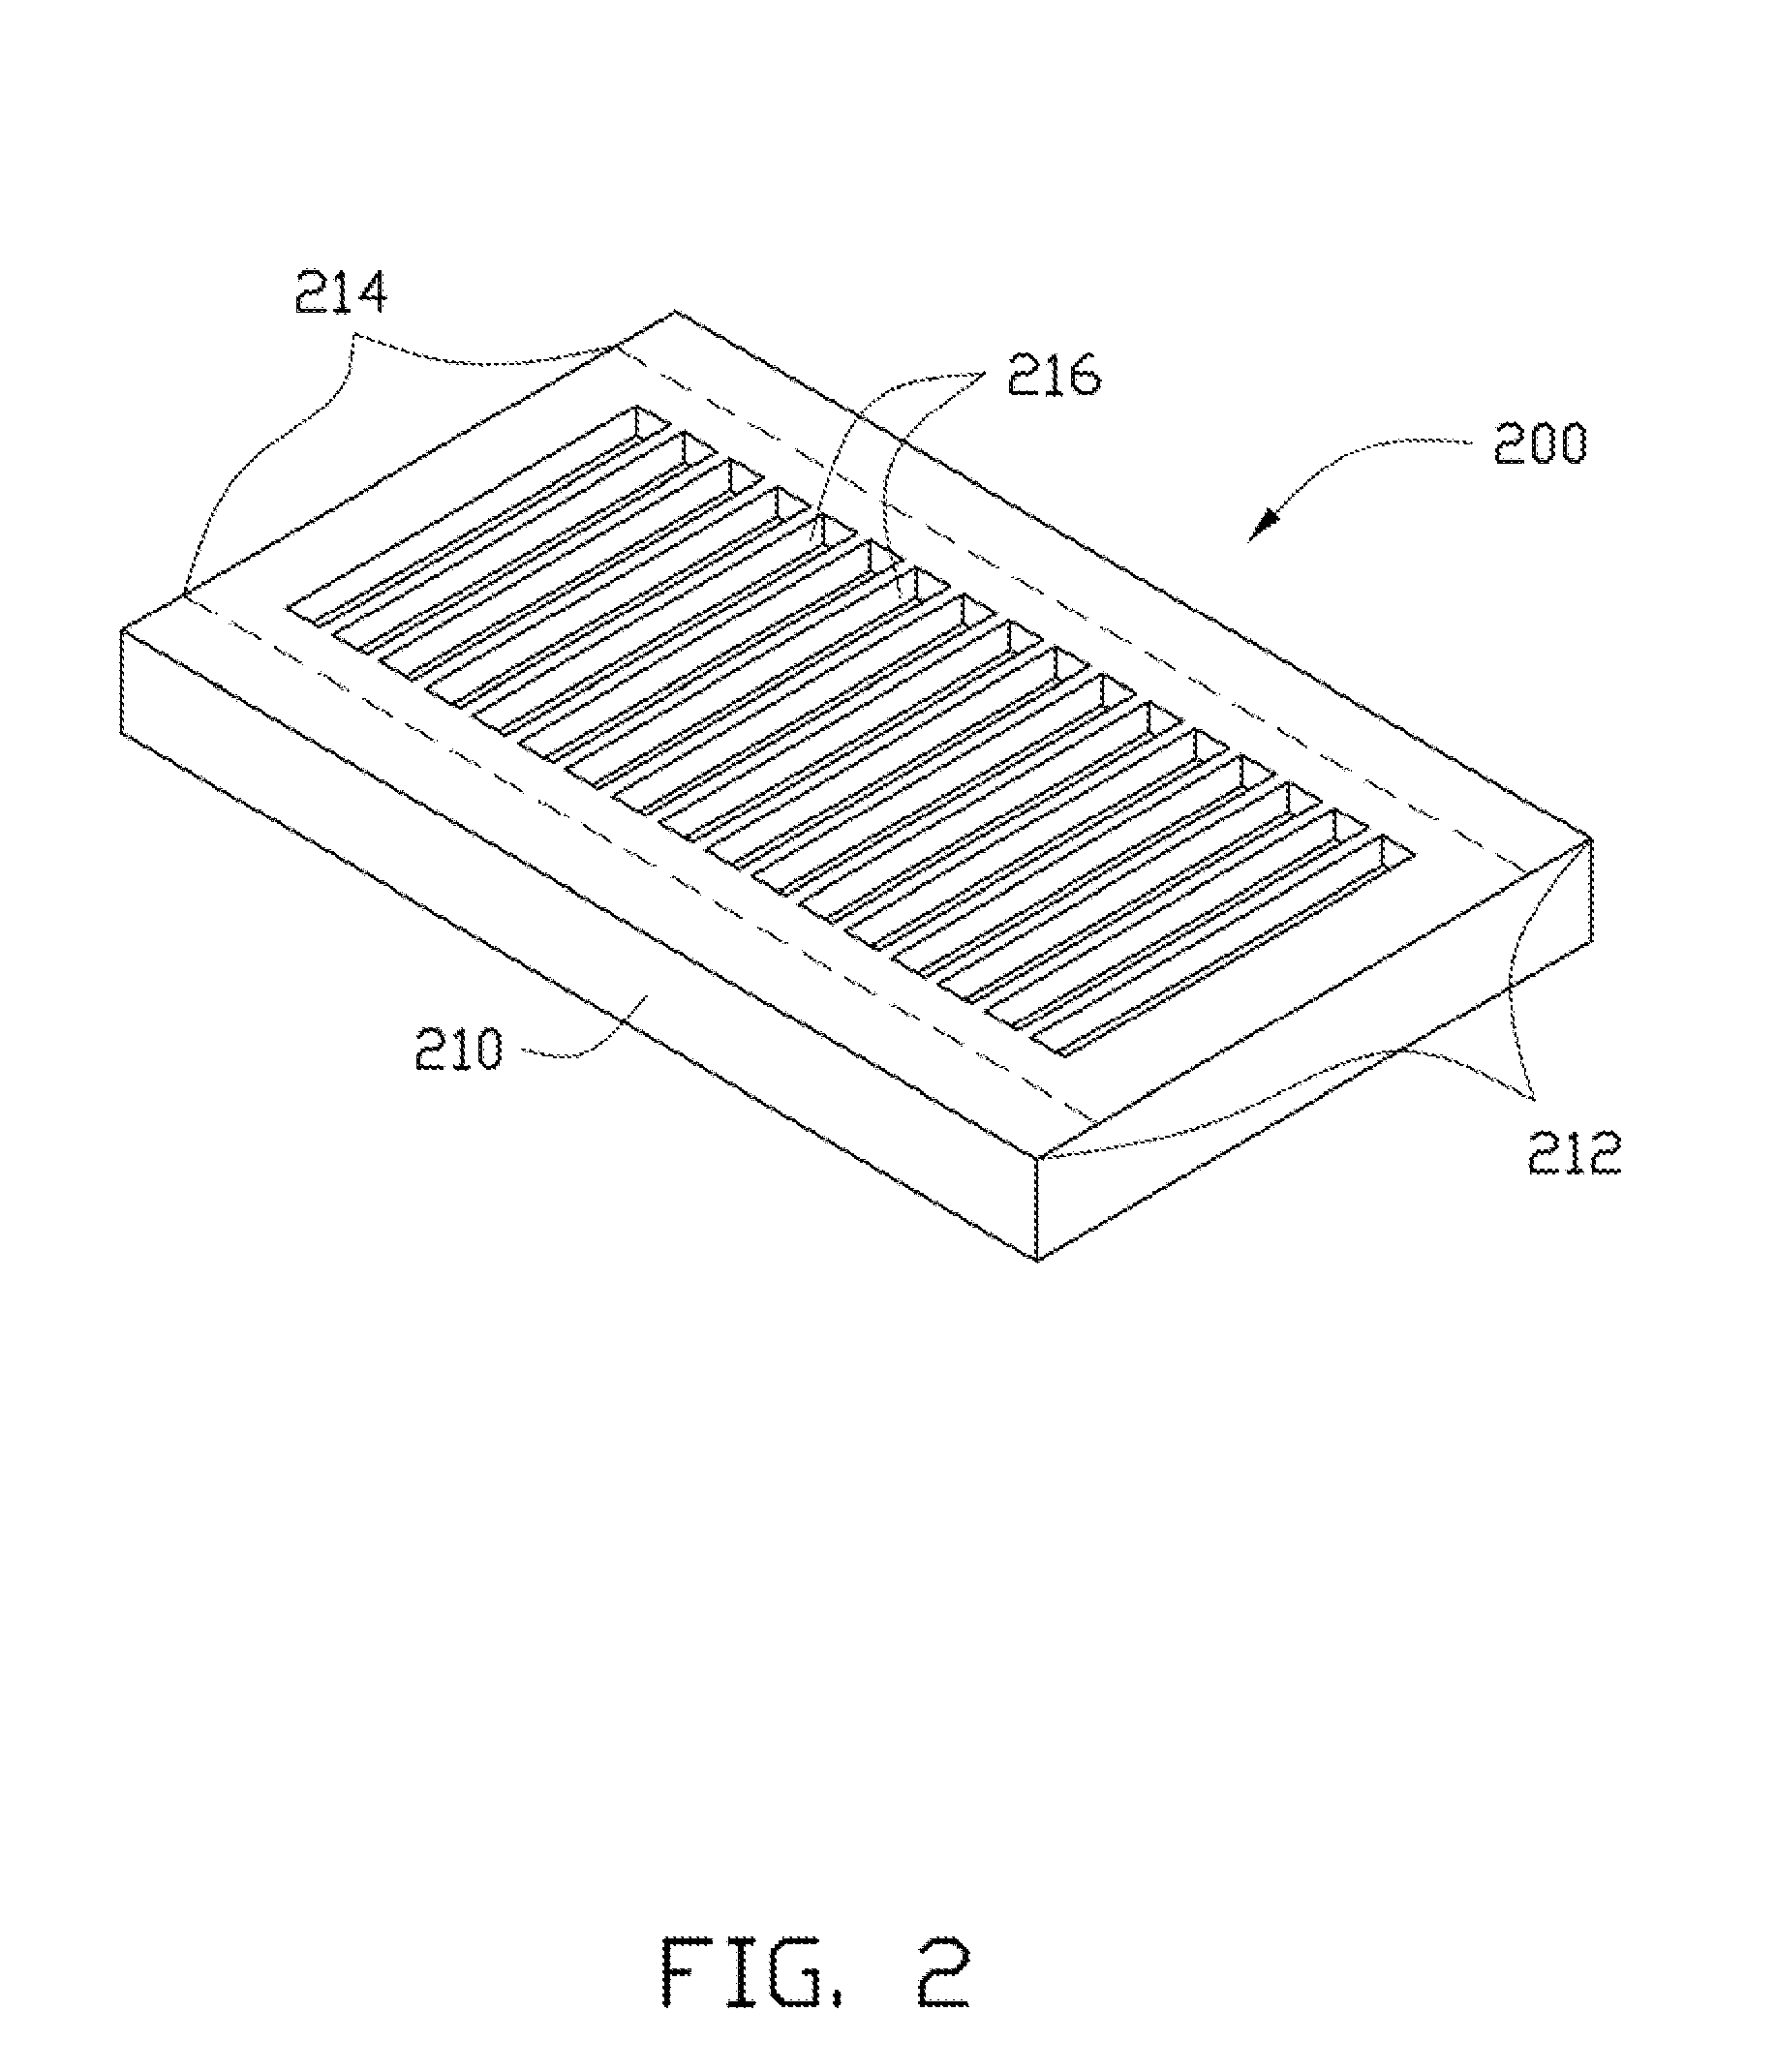 Carbon nanotube film supporting structure and method for using same